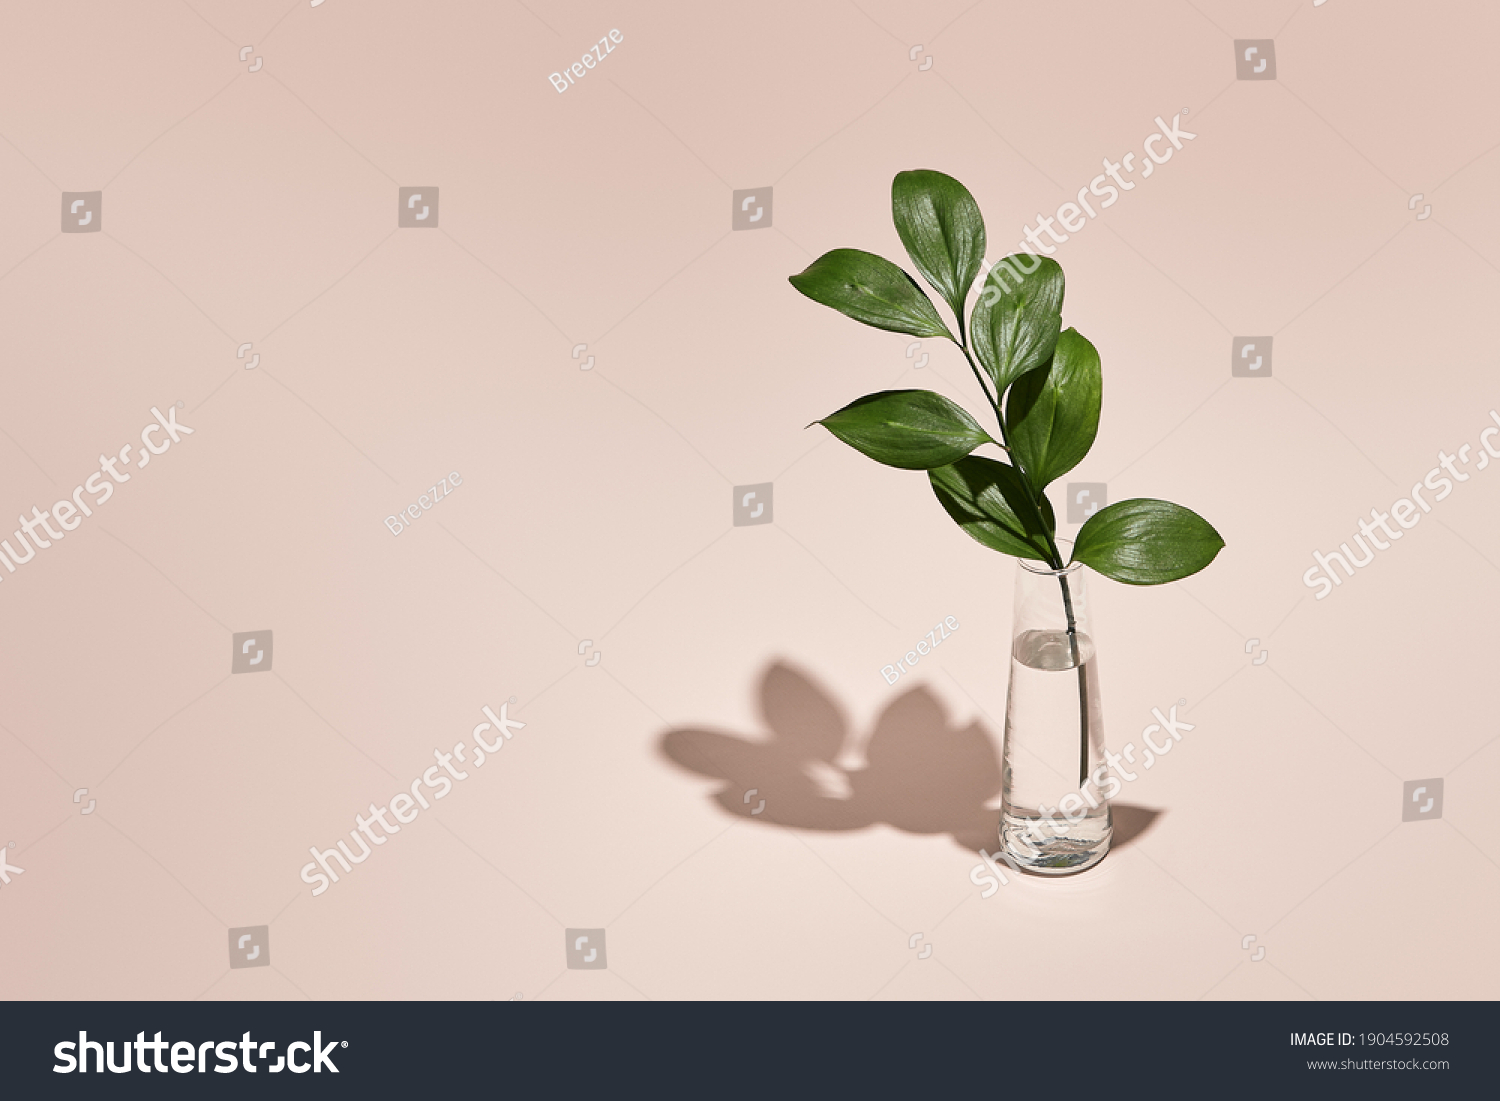 Green leaf and vase minimal summer or spring still life on pastel pink table. Sunlight, hard shadow. Floral, interior, nature concept #1904592508